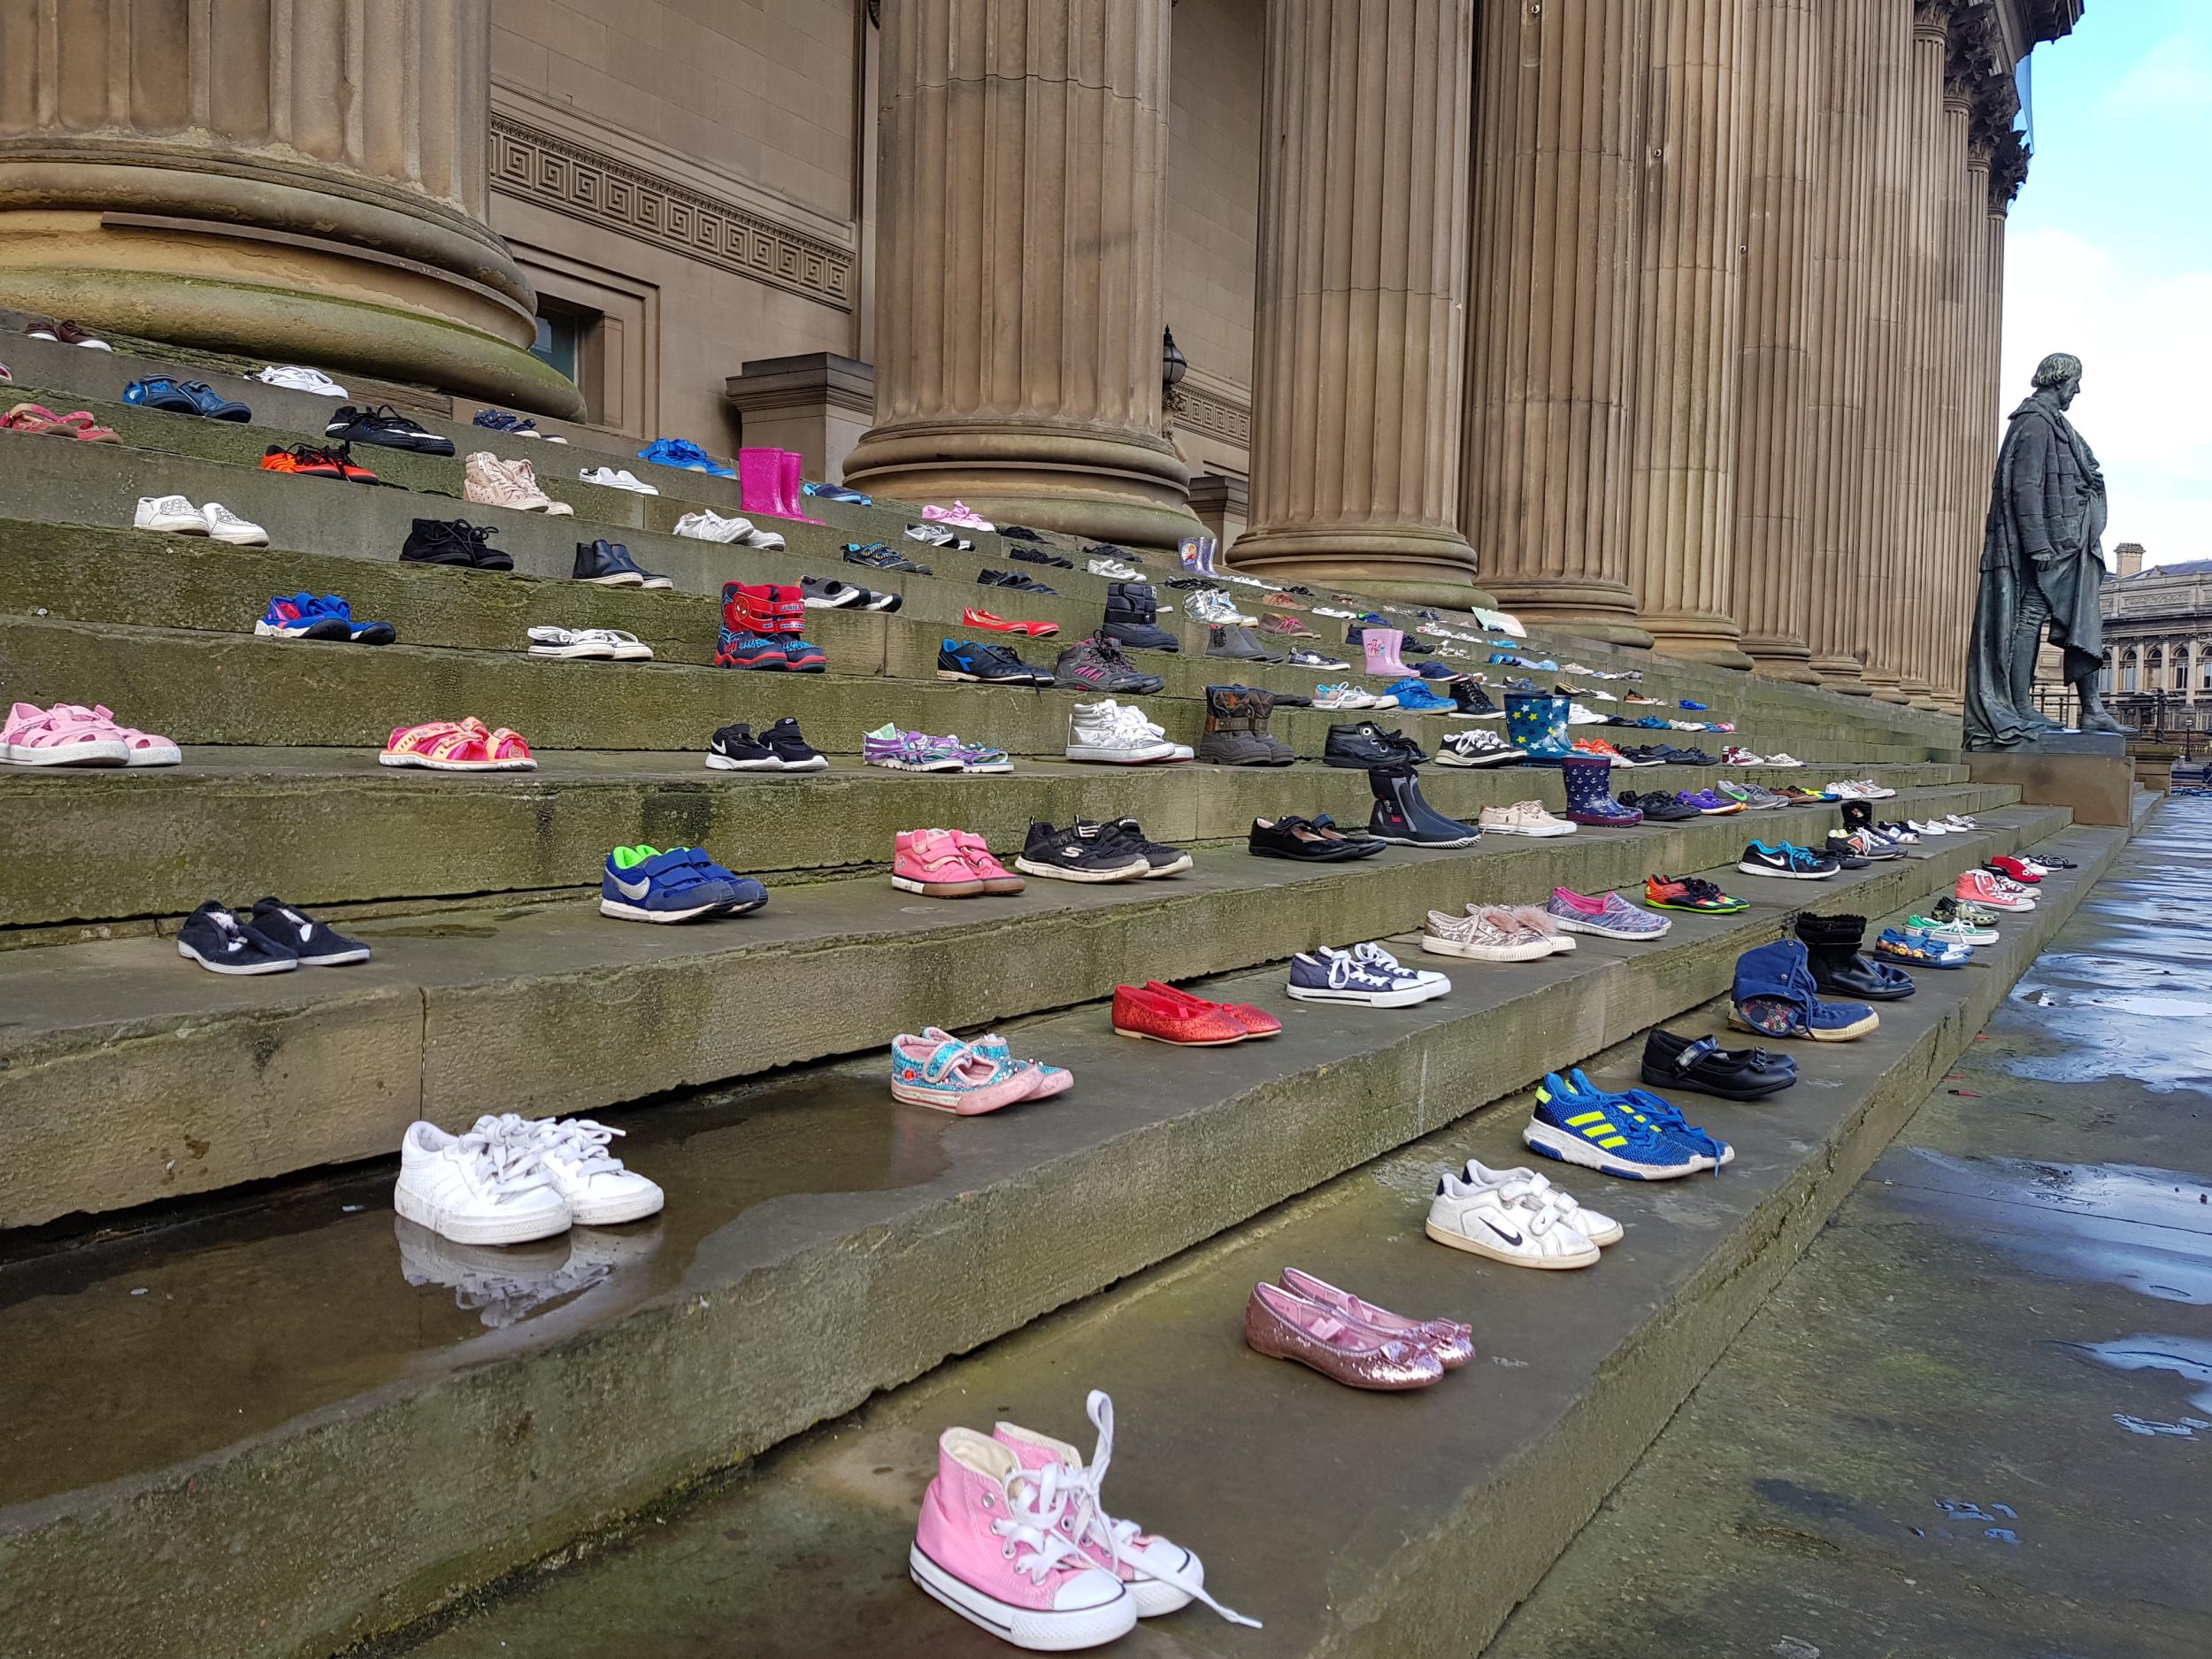 226 shoes were displayed to represent the number of young people who took their own lives in 2017